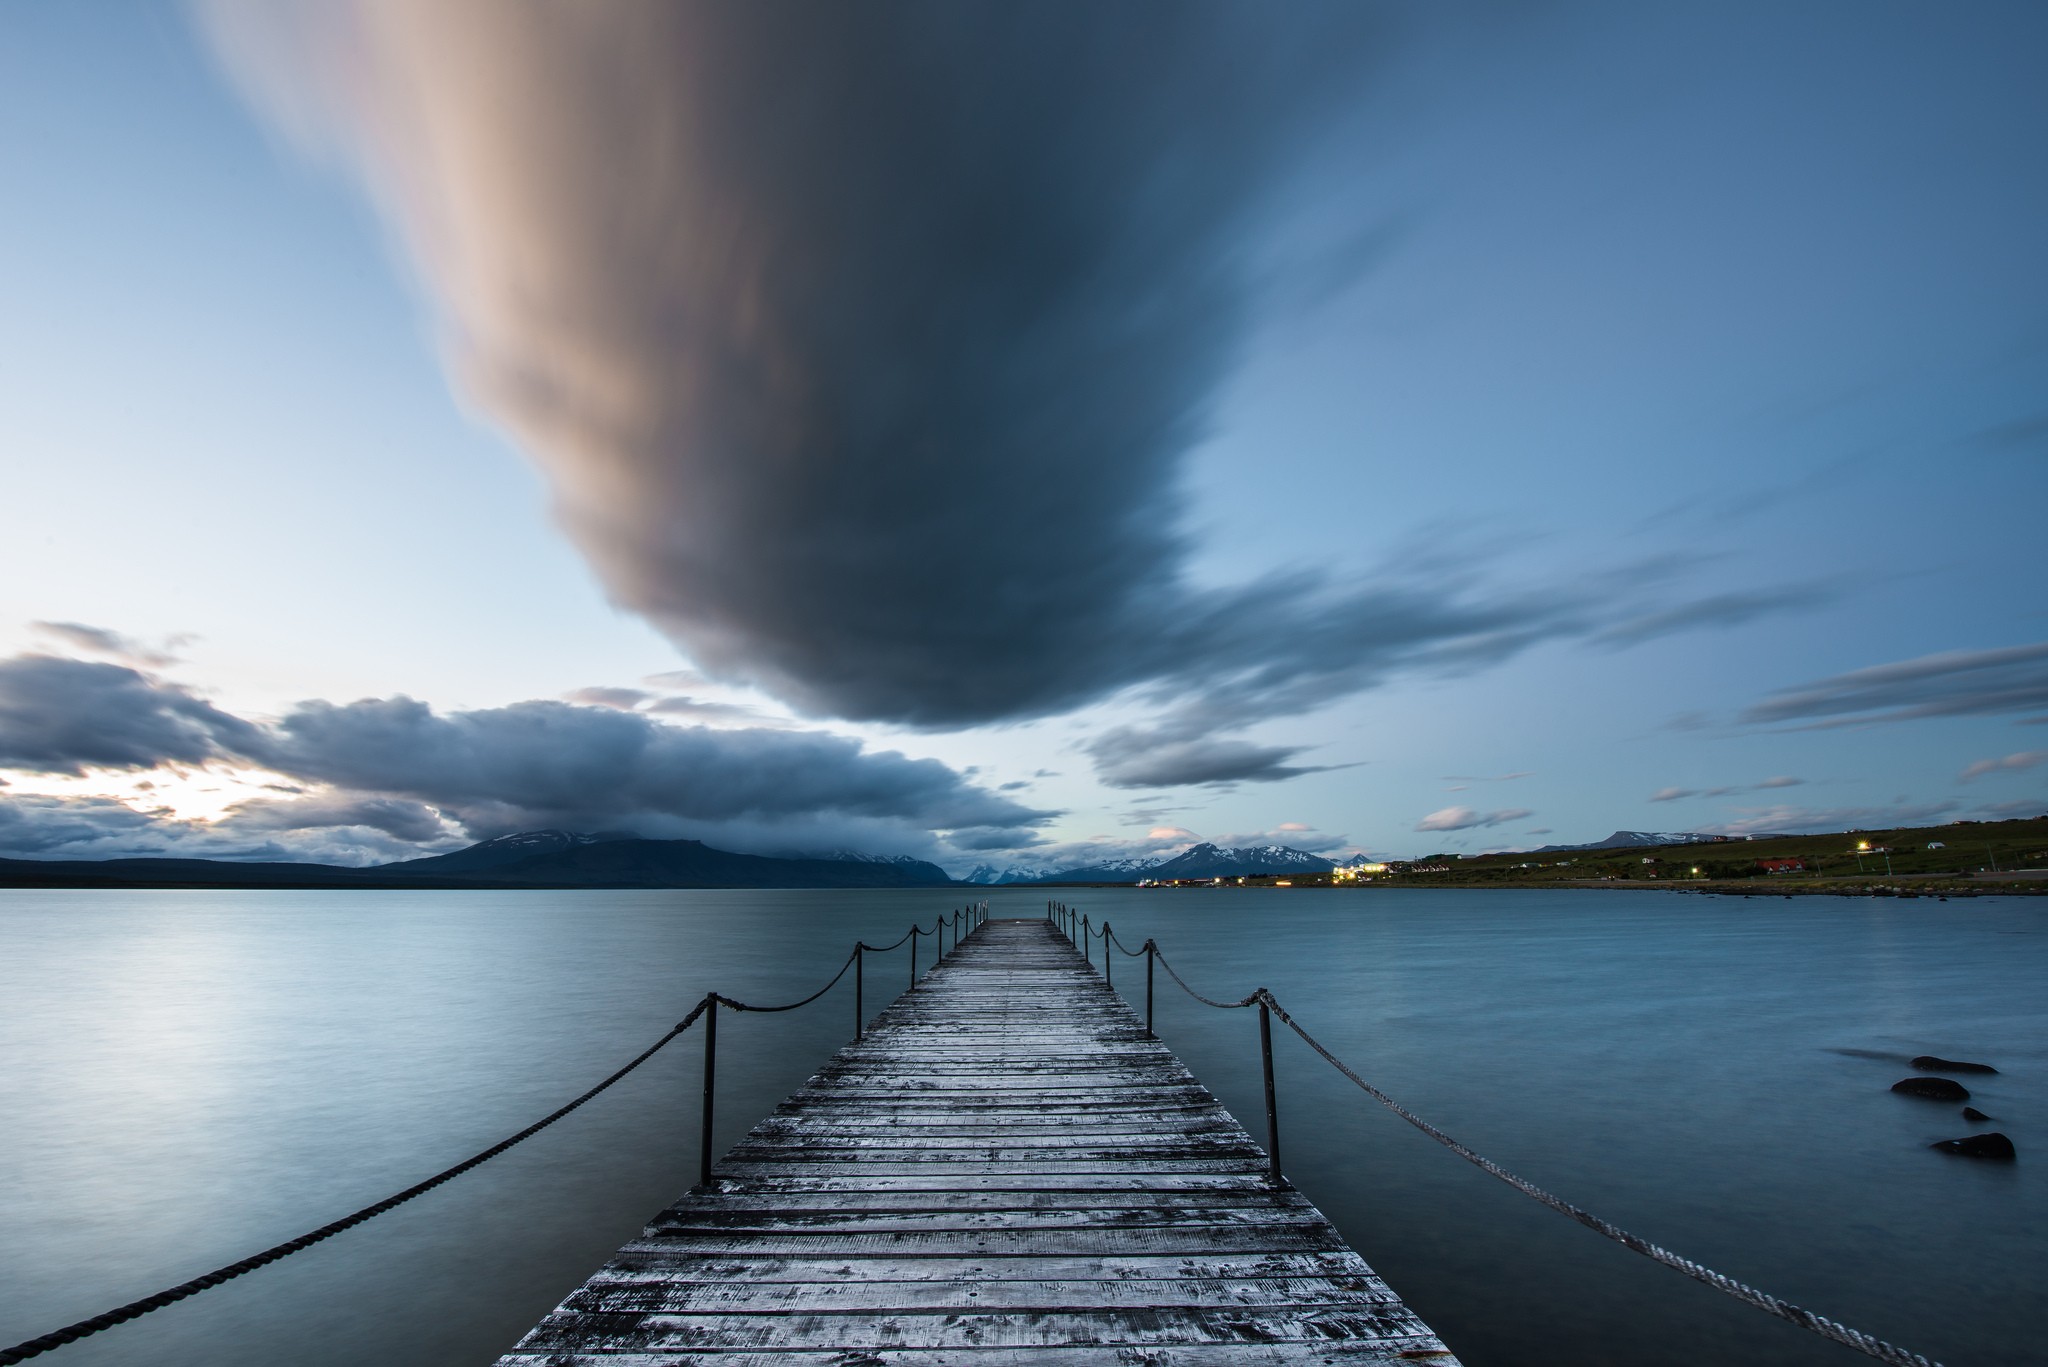 General 2048x1367 Chile water pier clouds sky nature outdoors South America